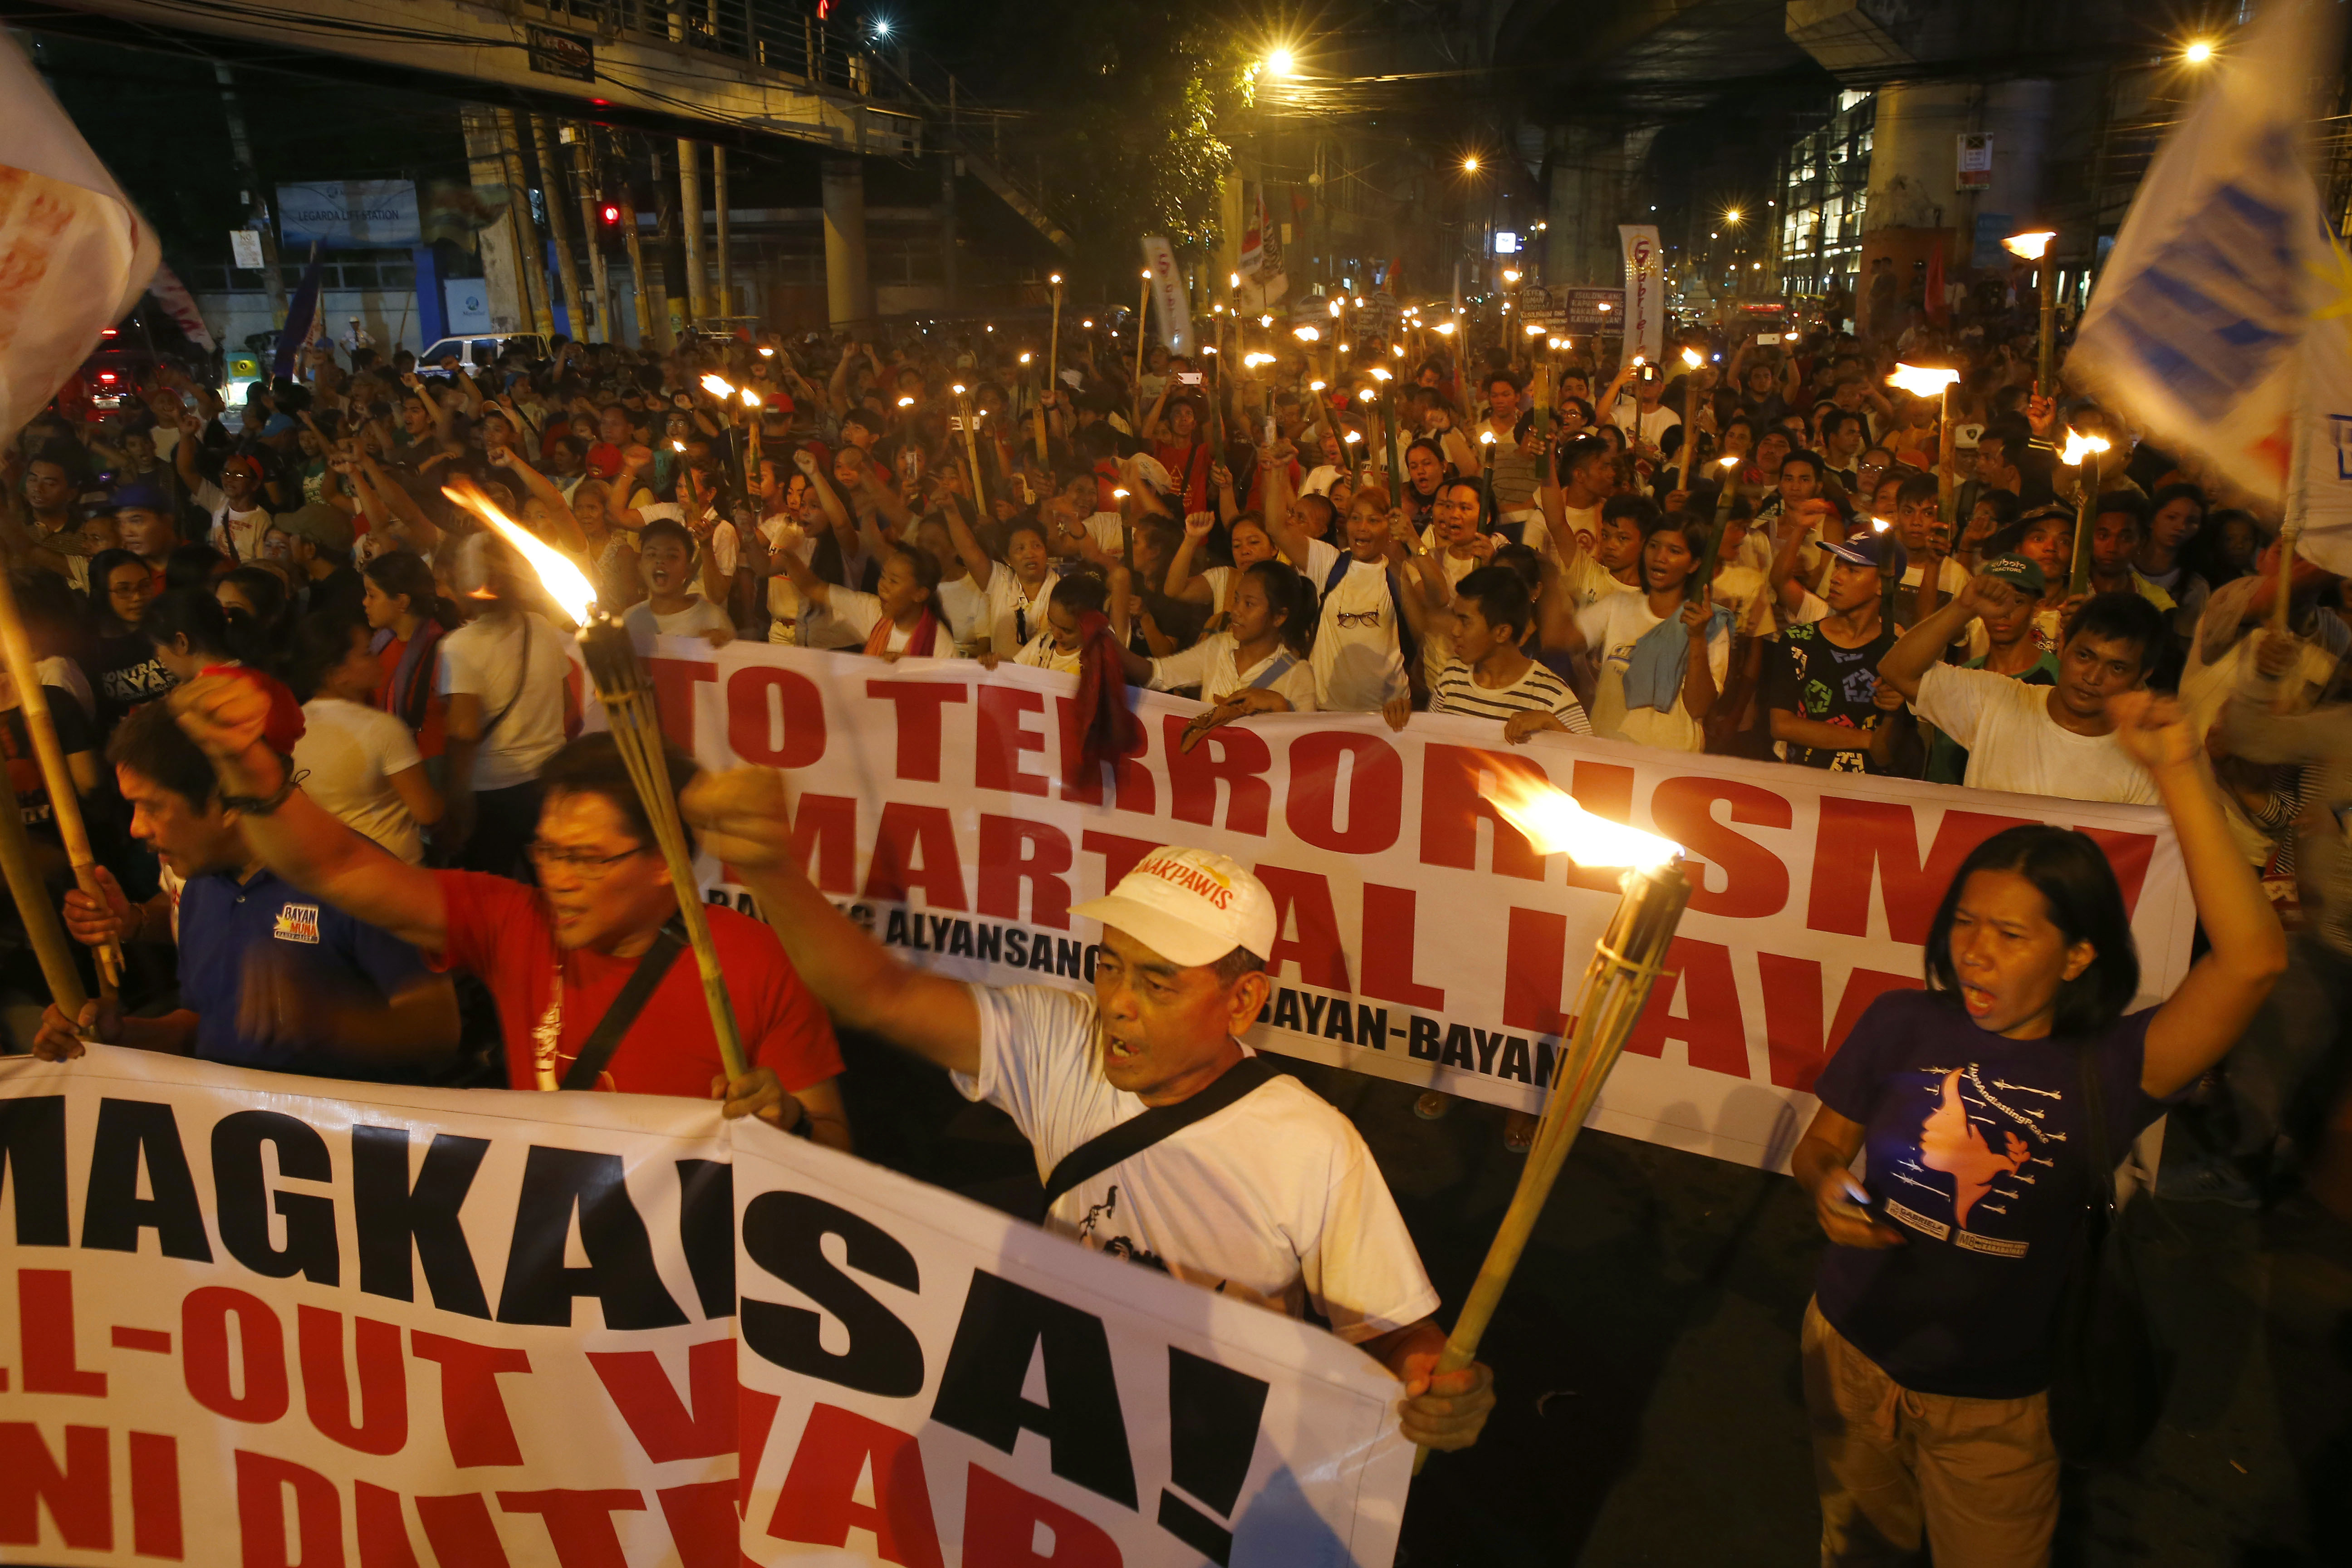 Protesters shout slogans during a rally near the Presidential Palace to denounce the Martial Law declaration of President Rodrigo Duterte after Muslim militants laid a siege of Marawi city in southern Philippines for three weeks, Monday, June 12, 2017 in Manila, Philippines. The protesters also denounced the killings by Duterte's anti-drug crackdown. (AP Photo/Bullit Marquez)